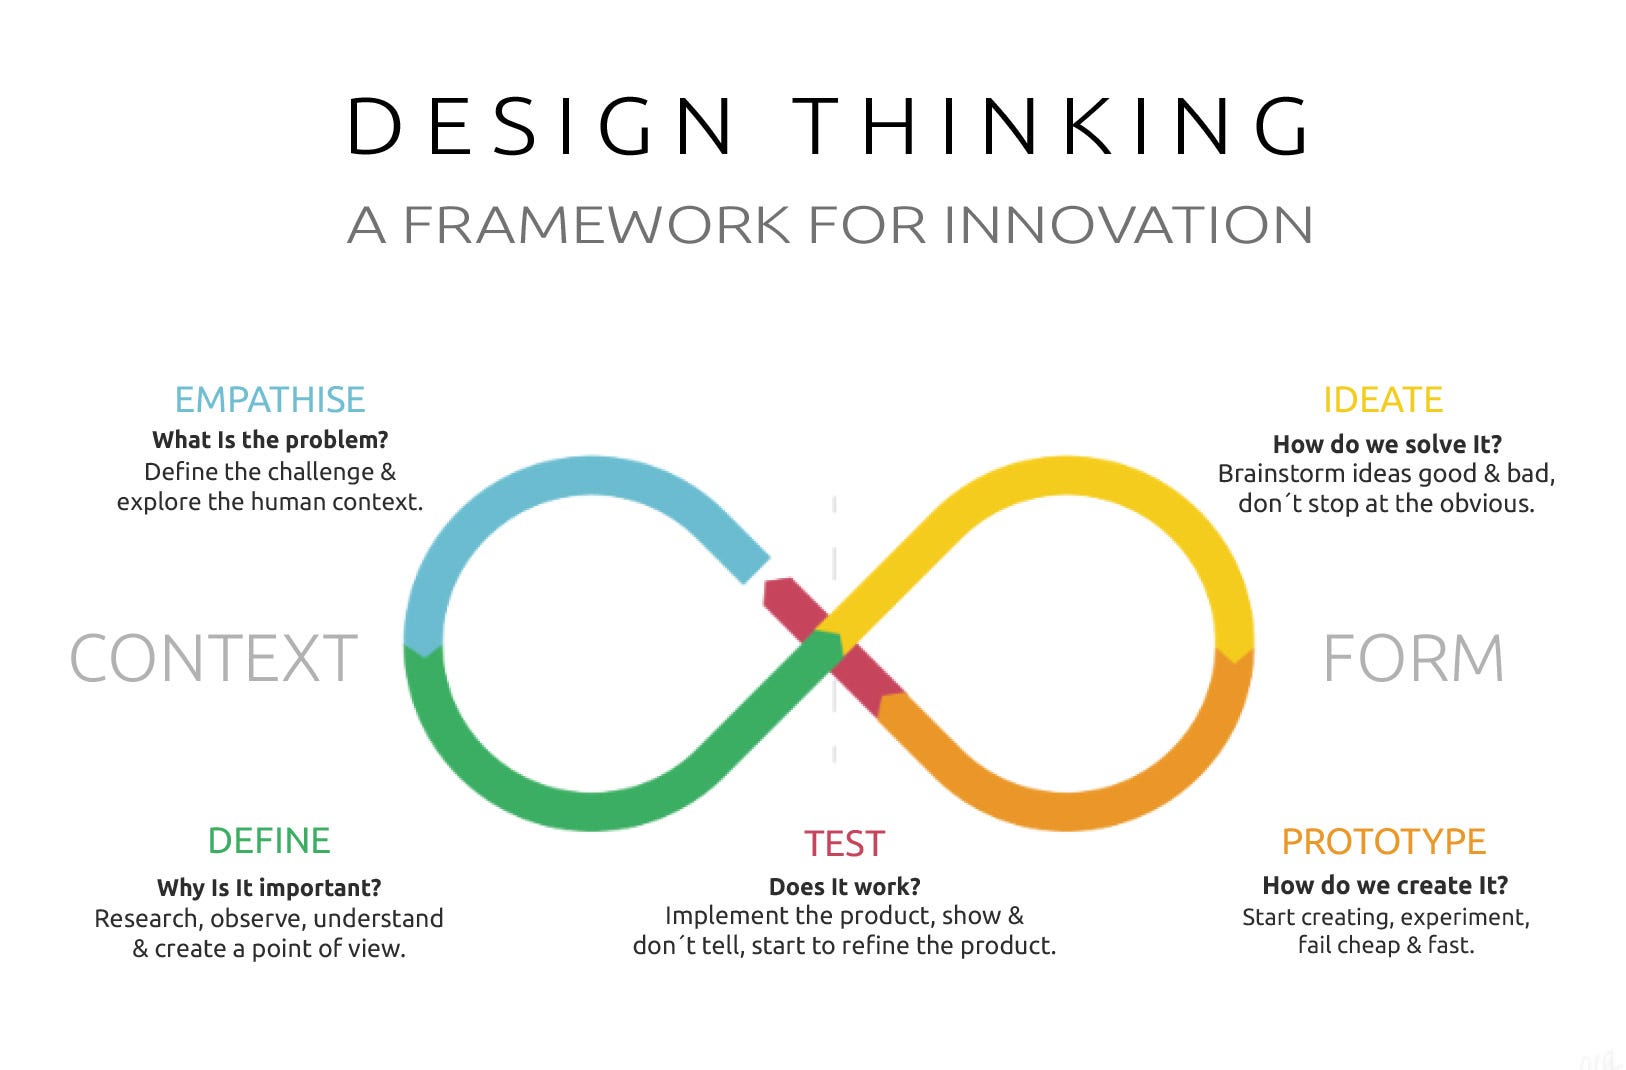 hypothesis creation in which phase of design thinking